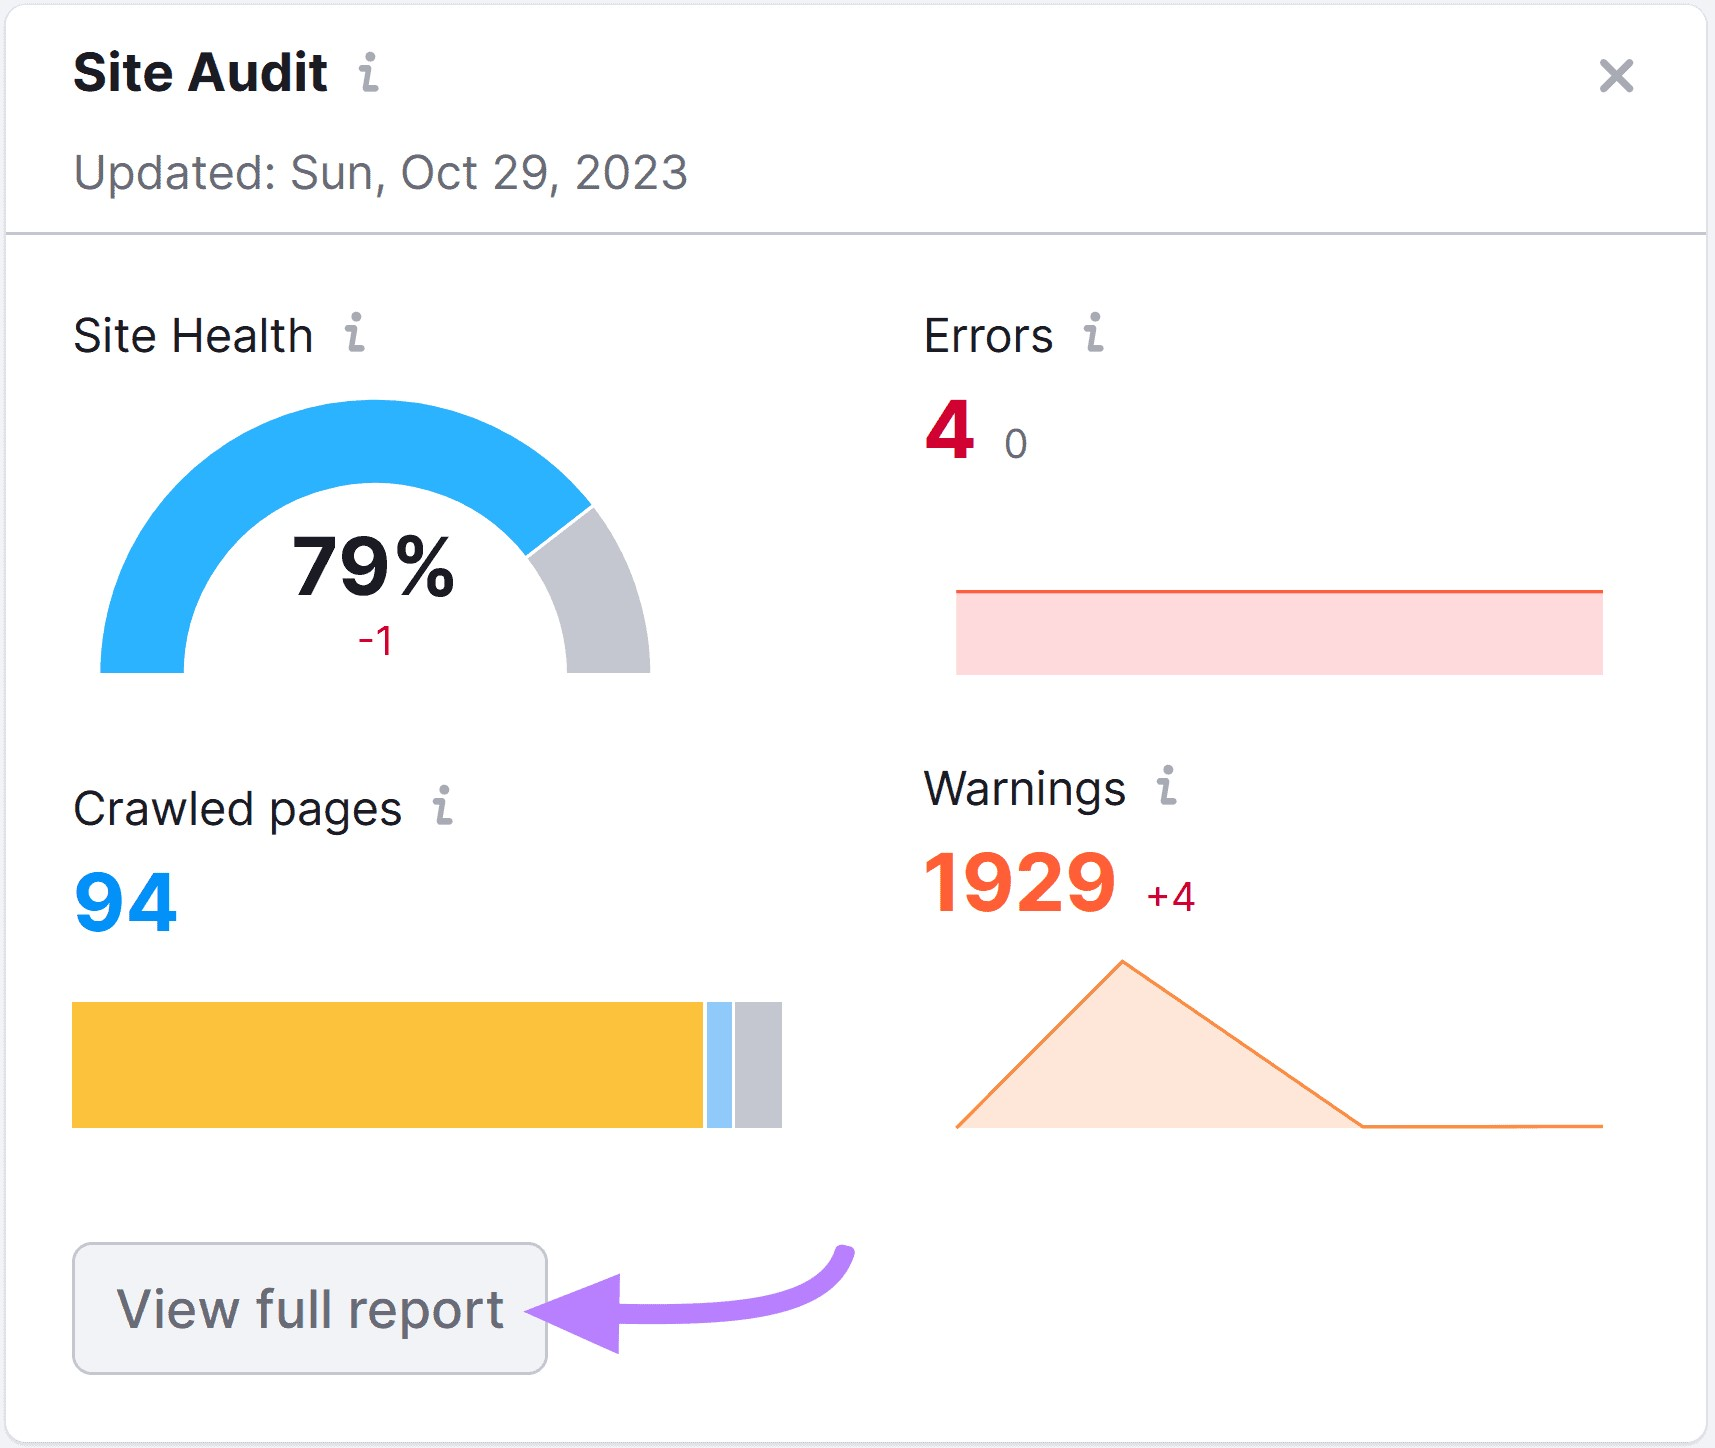 "View full report" button highlighted under “Site Audit” widget